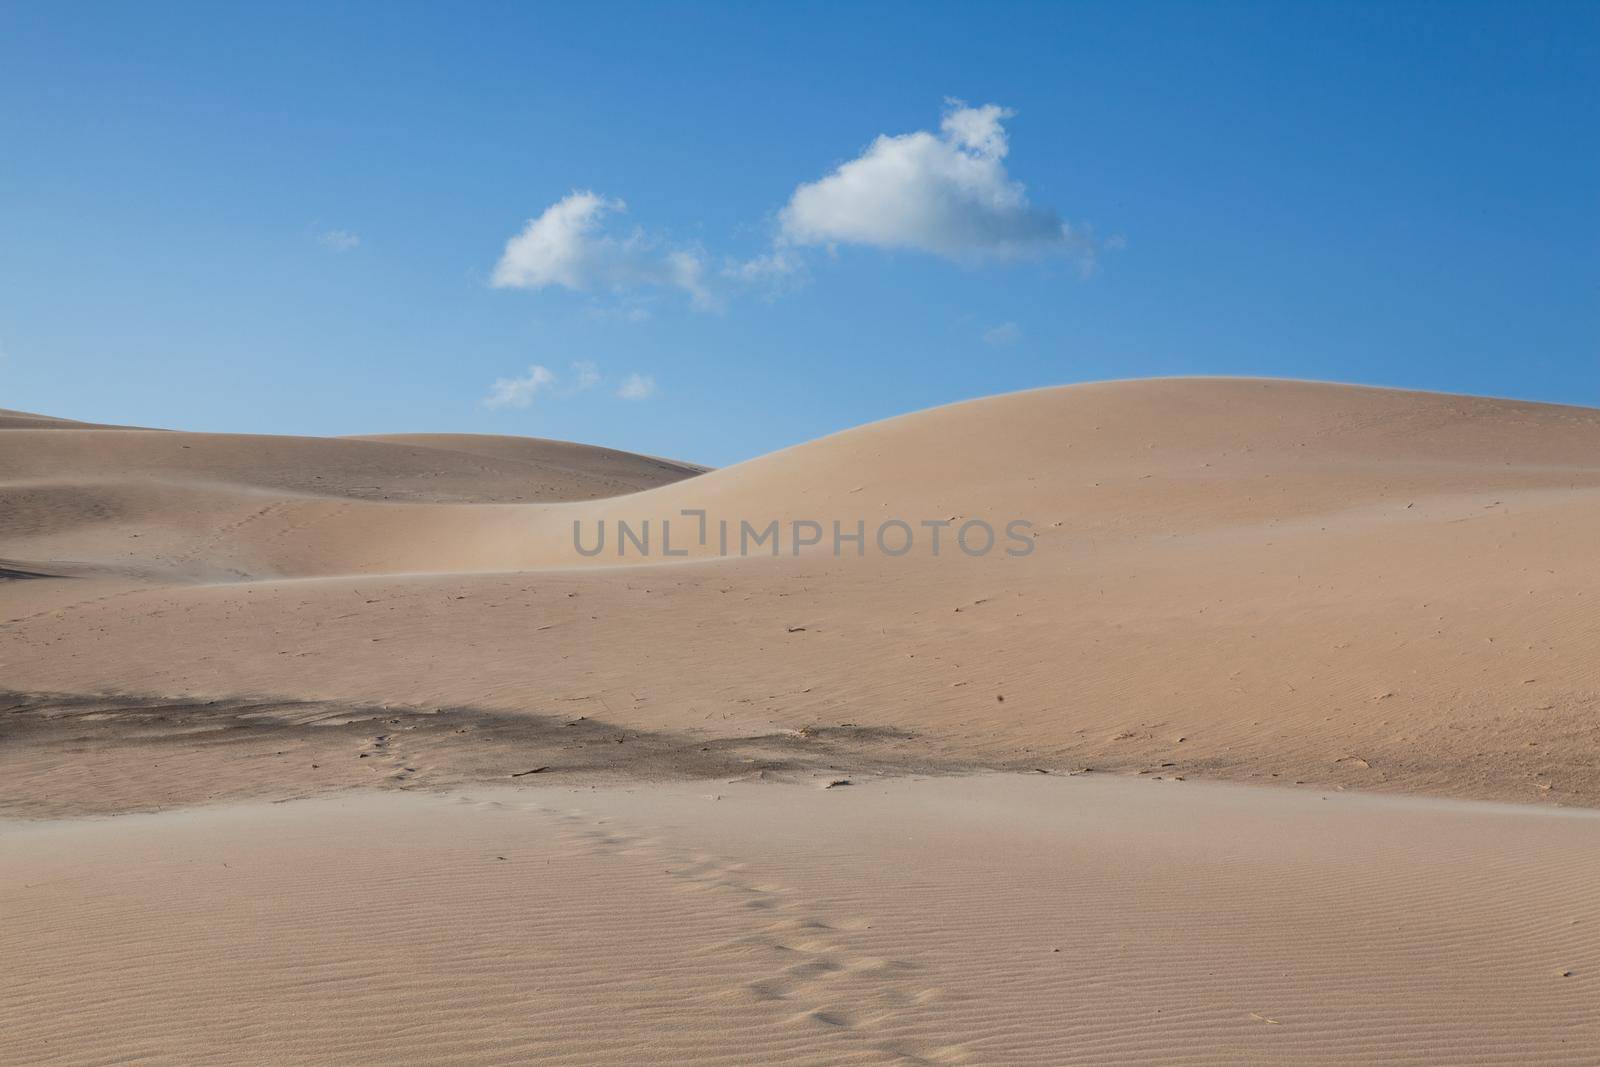 Dunes in Bolonia, Andalusia, Spain. This dune is over 30 metres high and 200 metres wide.